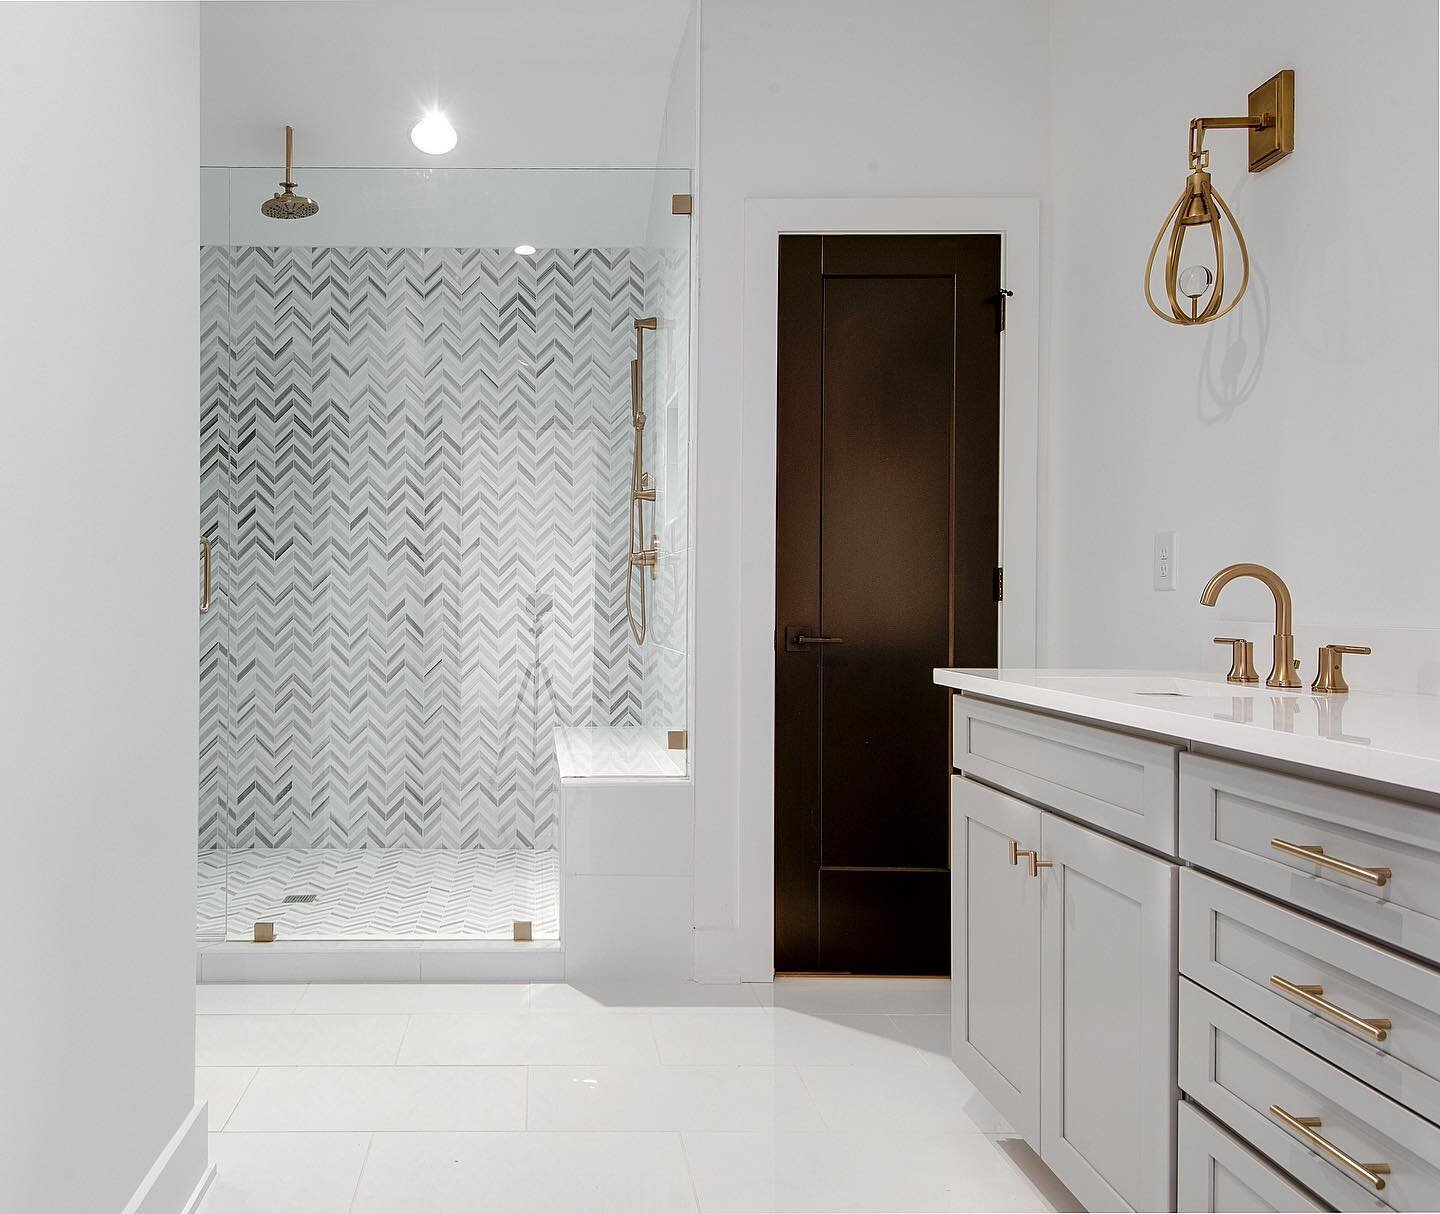 What&rsquo;s your favorite thing about this bathroom? It&rsquo;s hard to decide, but we think that&rsquo;s pretty good problem to have😉
&bull;
&bull;
&bull;
#nashvillerealestate #nashvillehomes #nashvillehomesforsale #nashvilleliving #homeinspo #lux